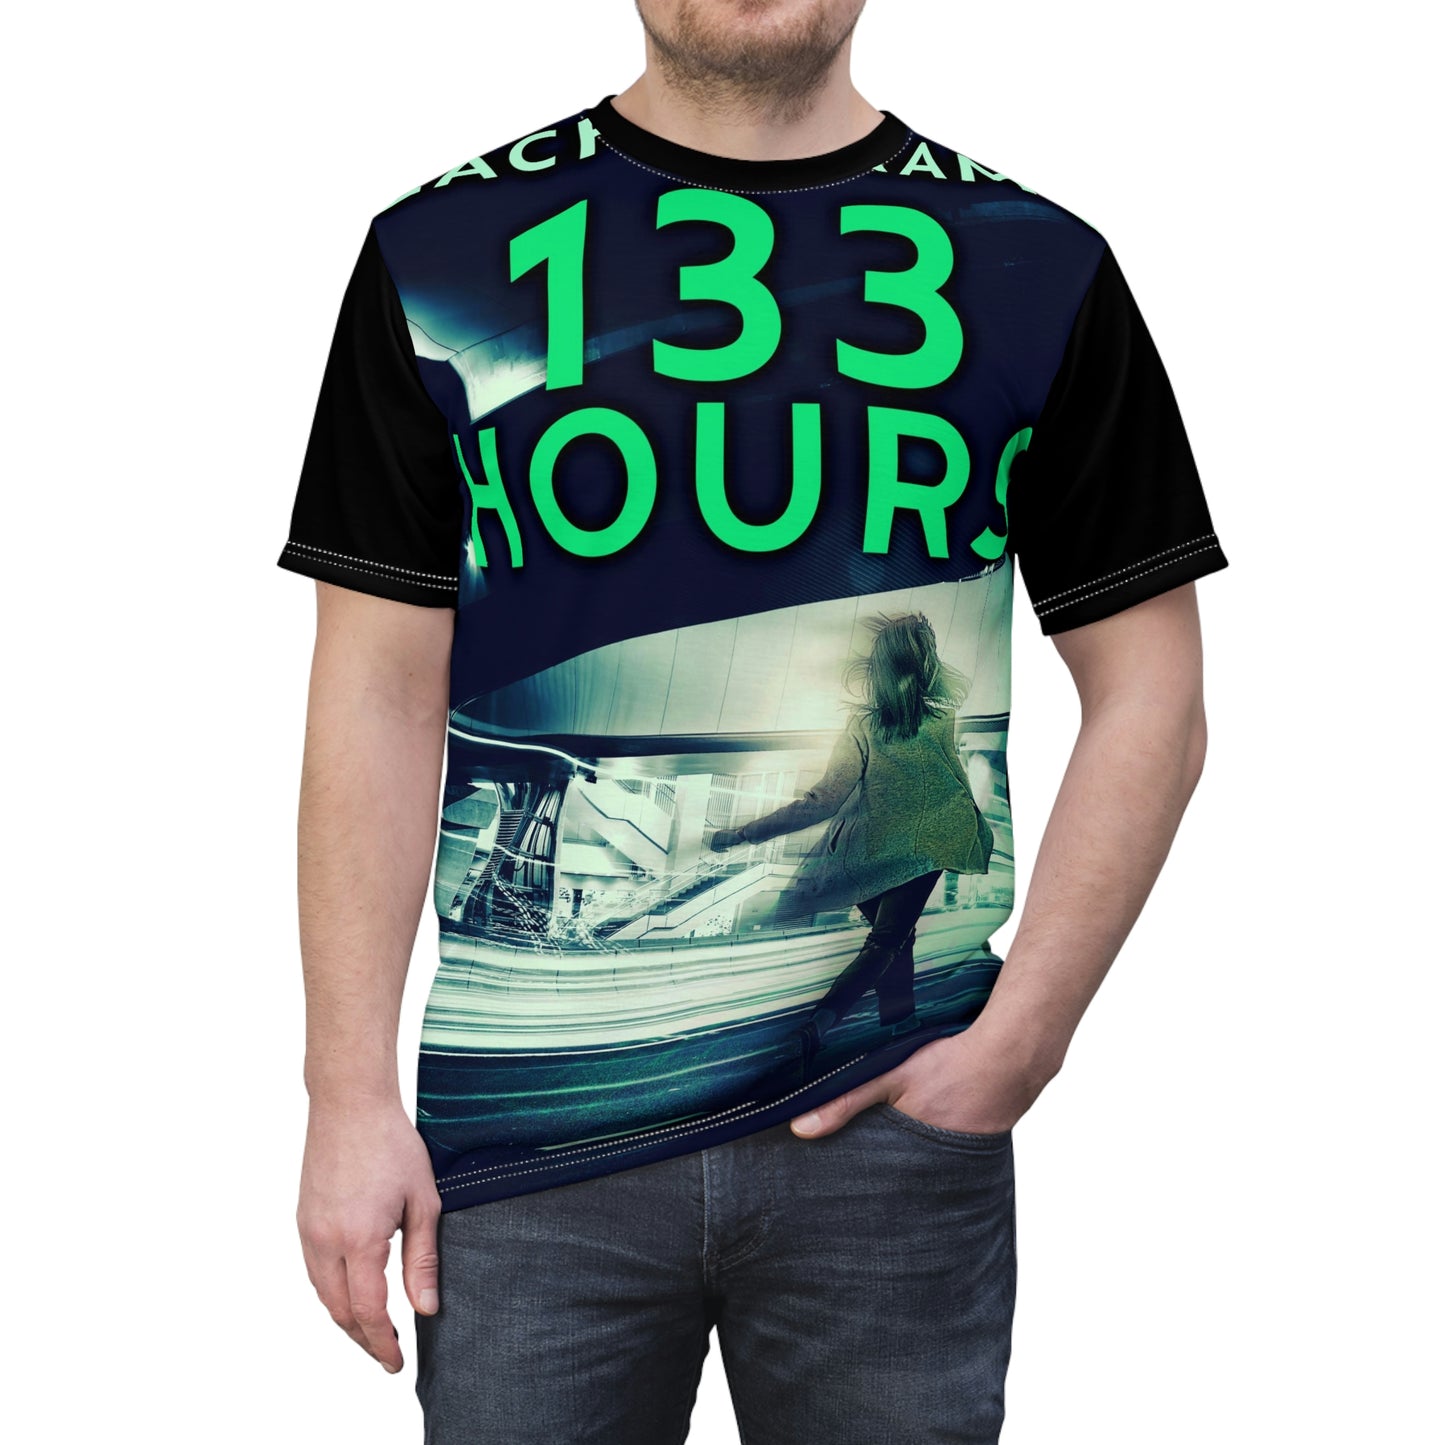 133 Hours - Unisex All-Over Print Cut & Sew T-Shirt